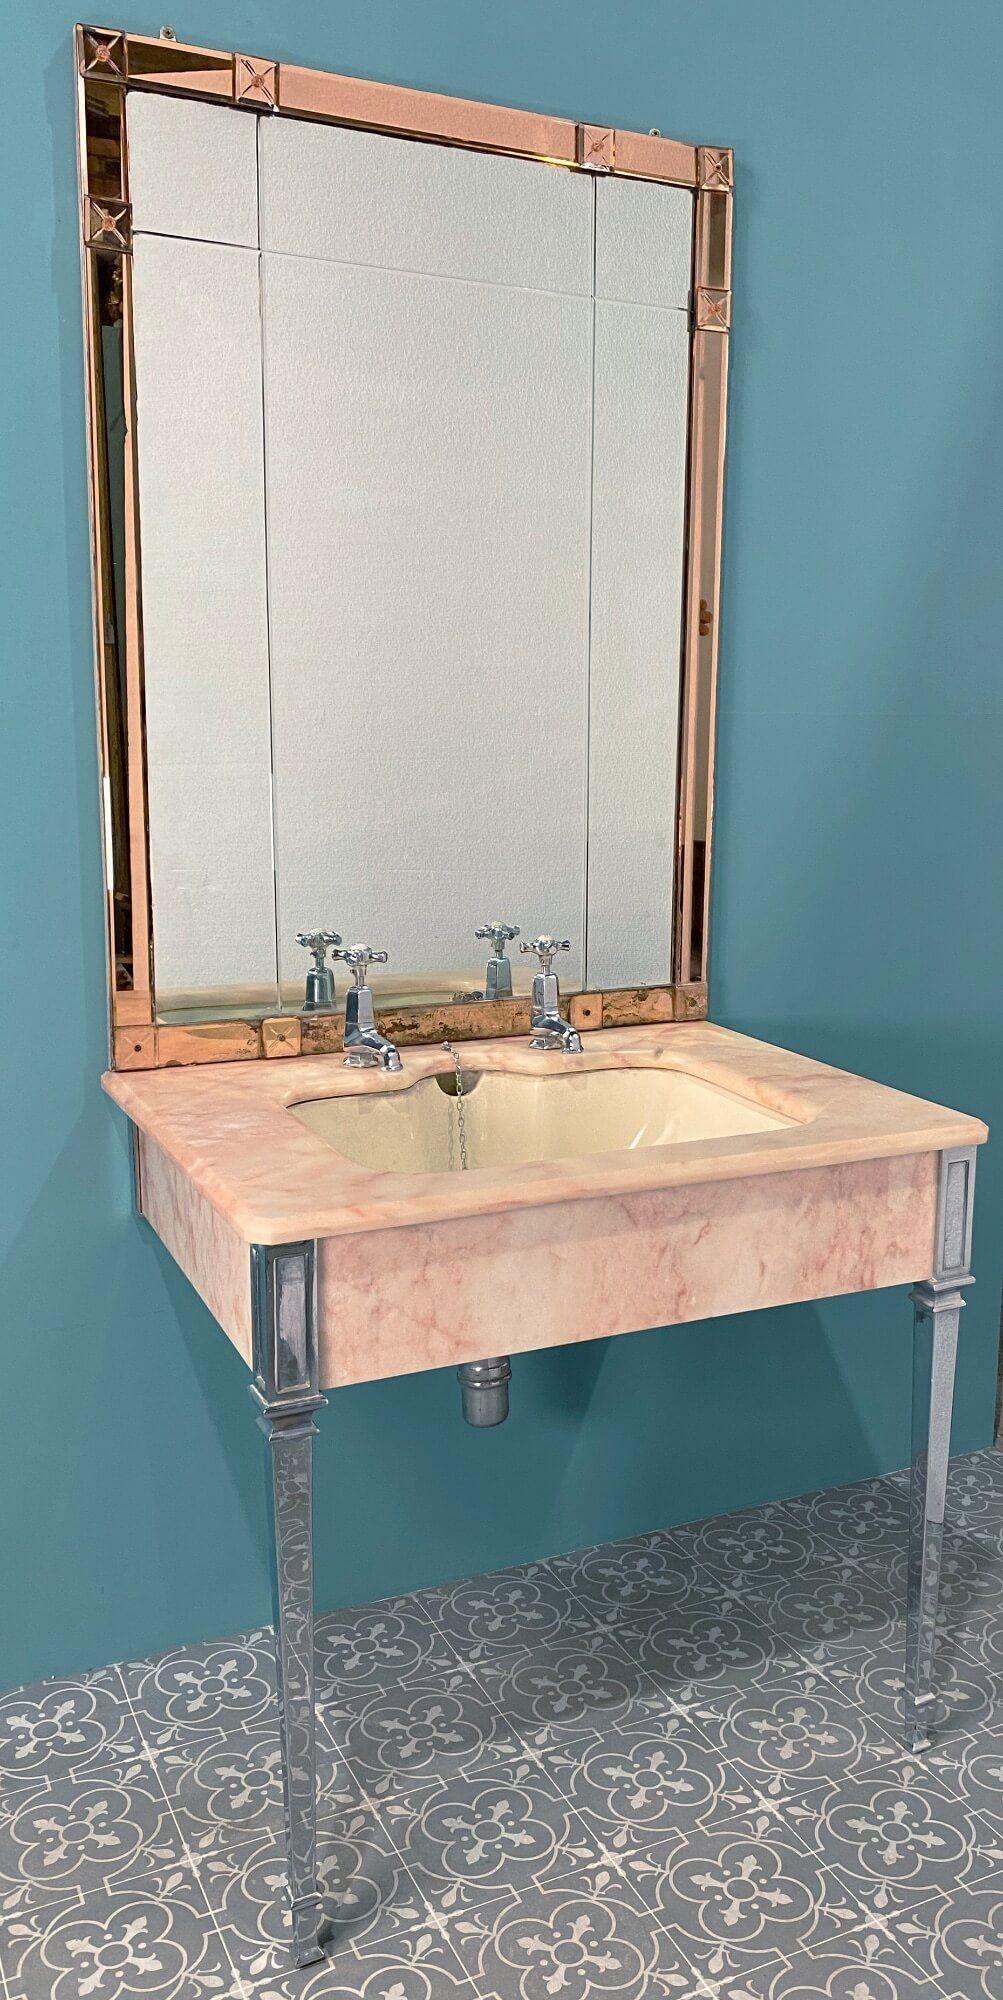 An impressive English Art Deco style marble washbasin with accompanying original mirror splashback, manufactured by John Bolding and Sons, 19th and 20th century manufacturers of high-class sanitary appliances. This stunning washstand once resided